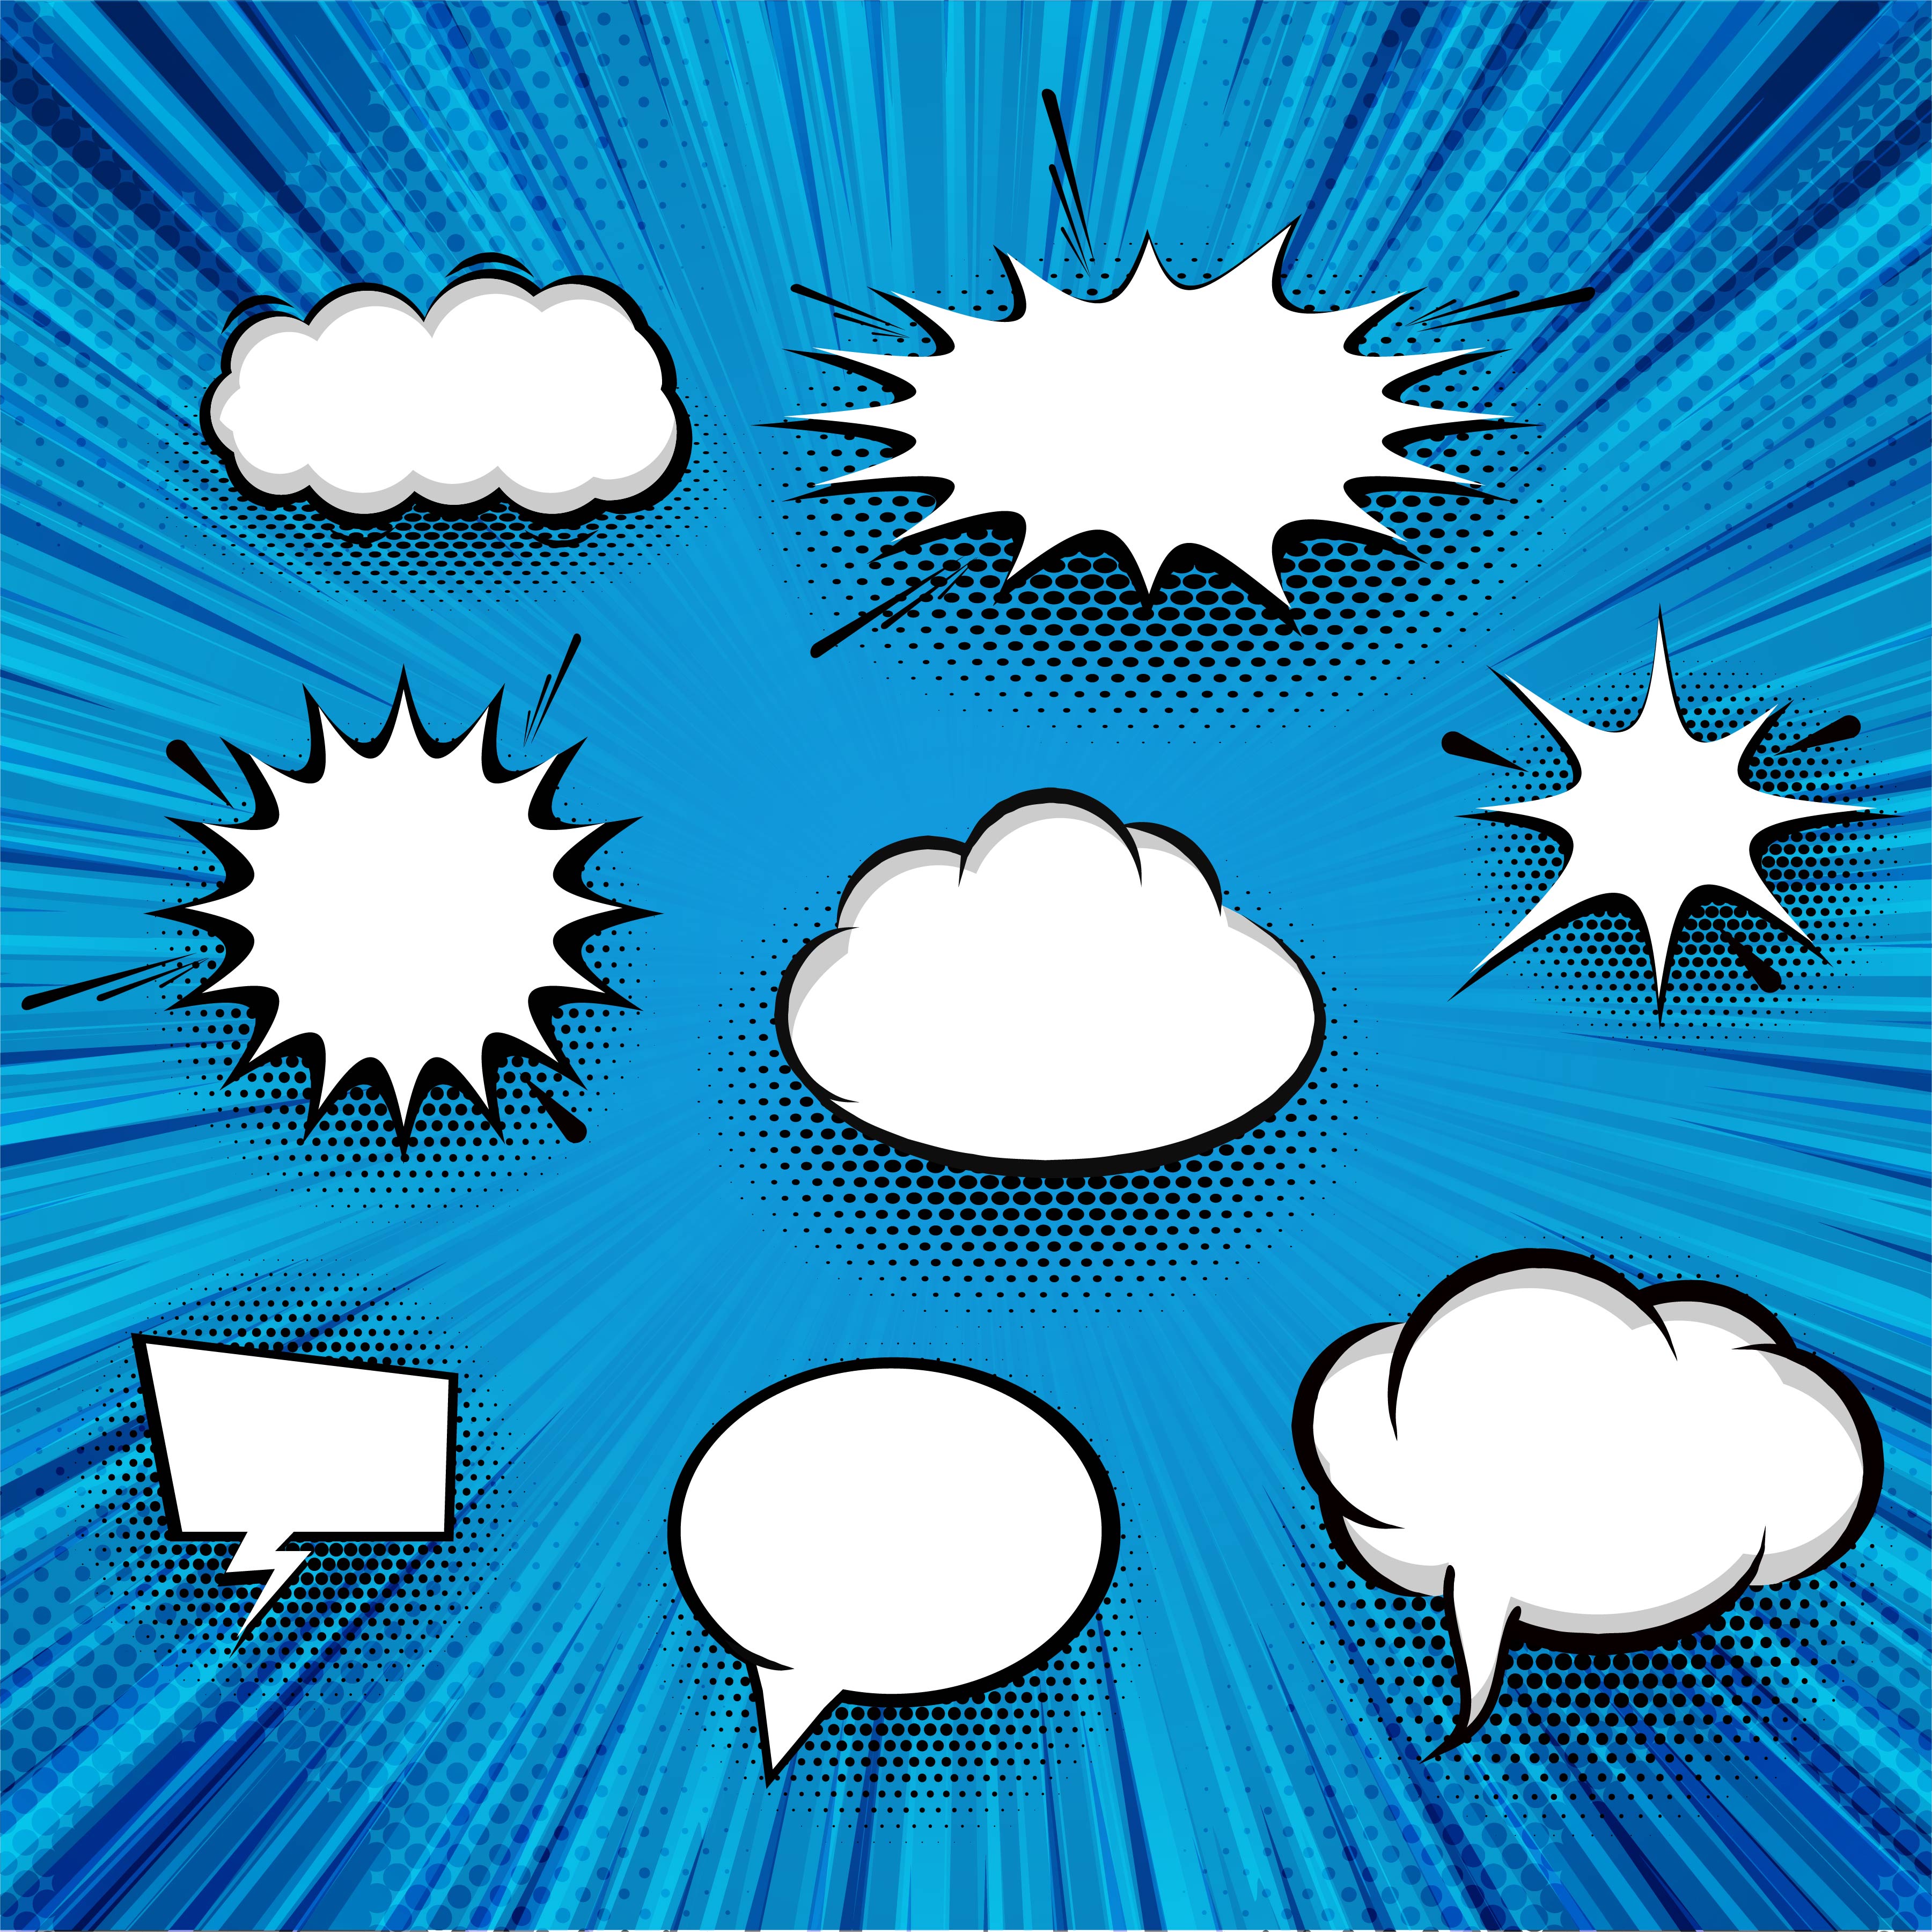 High Quality White Outlined Speech Bubble Chat Balloon Icon Pictogram  Comic Book Anime Useful For Web Site Banner Greeting Cards Apps And  Social Media Posts Stock Photo Picture And Royalty Free Image